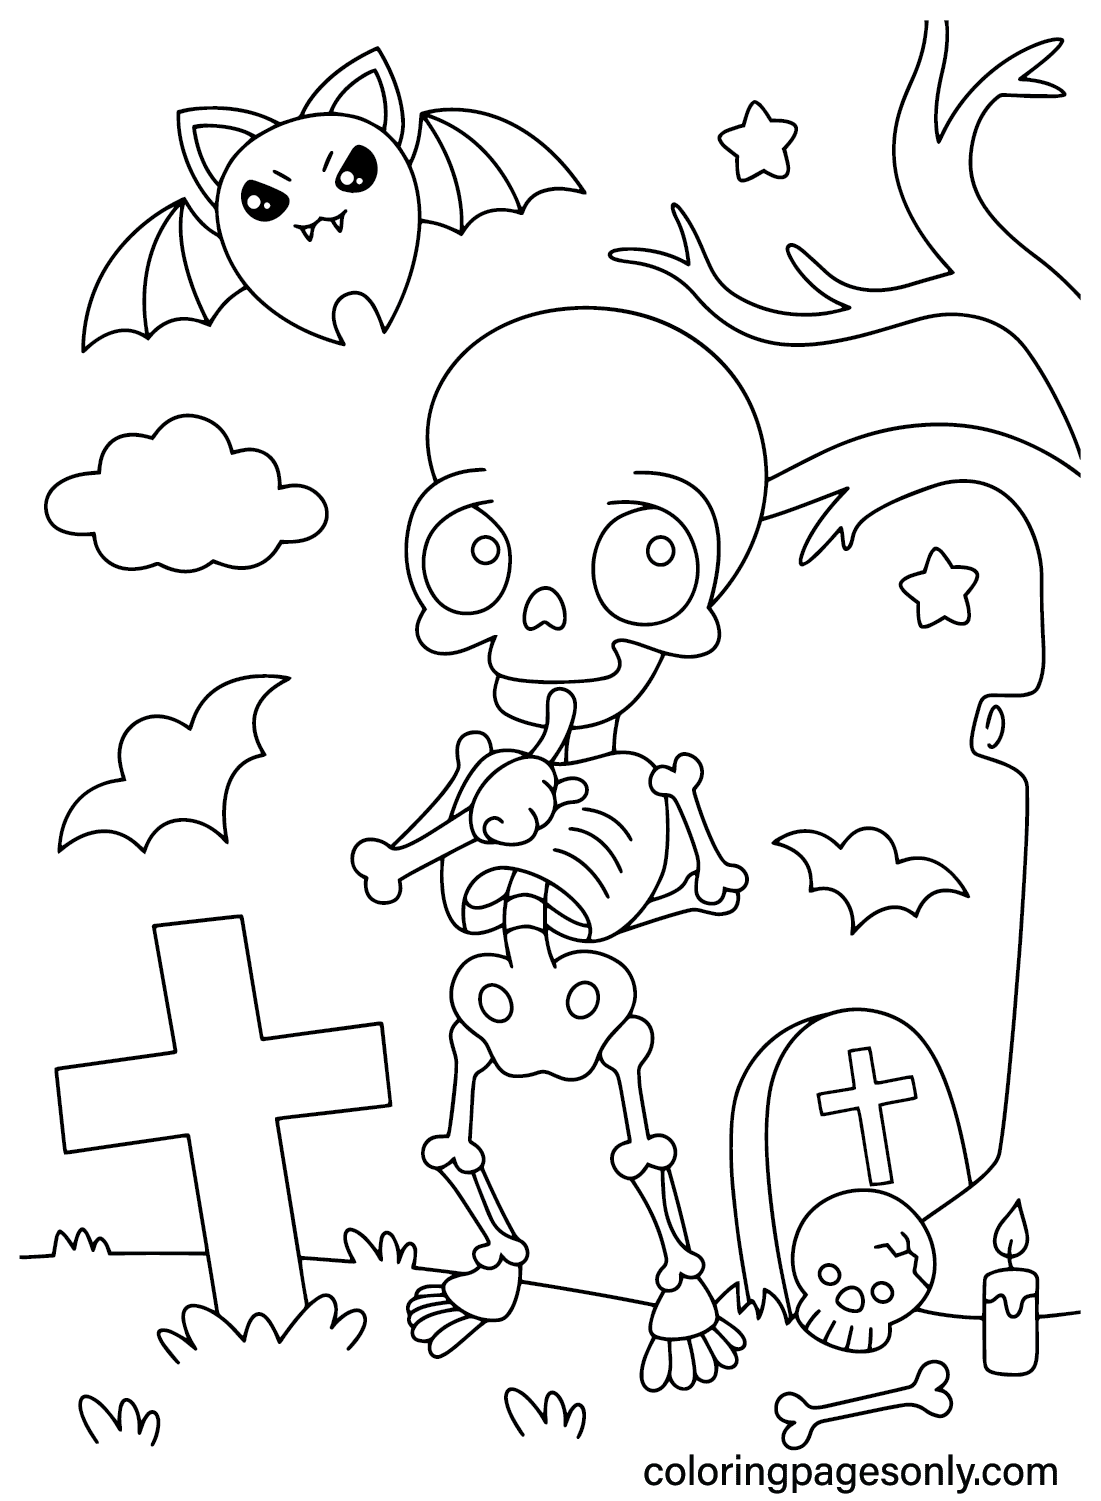 Halloween Cute Coloring Page - Free Printable Coloring Pages